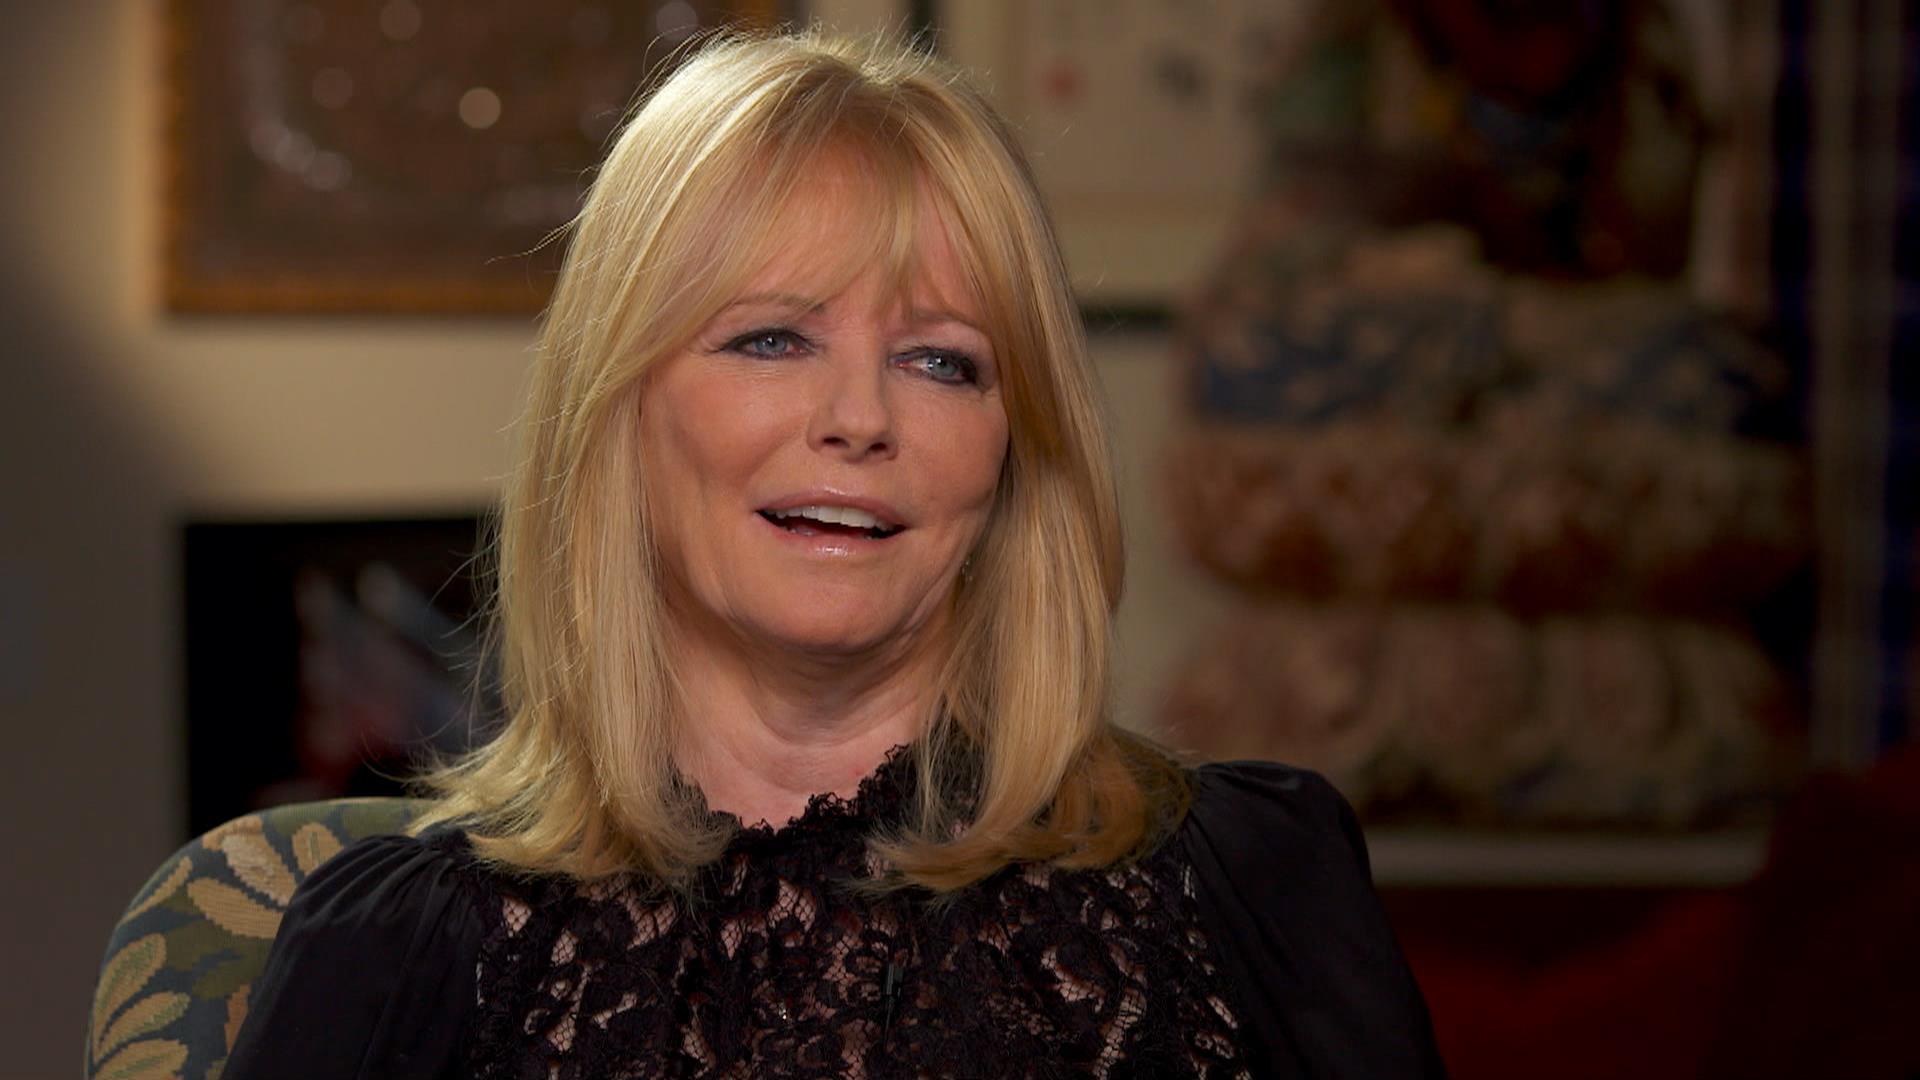 Catching up with Cheryl Tiegs, the all-American supermodel.